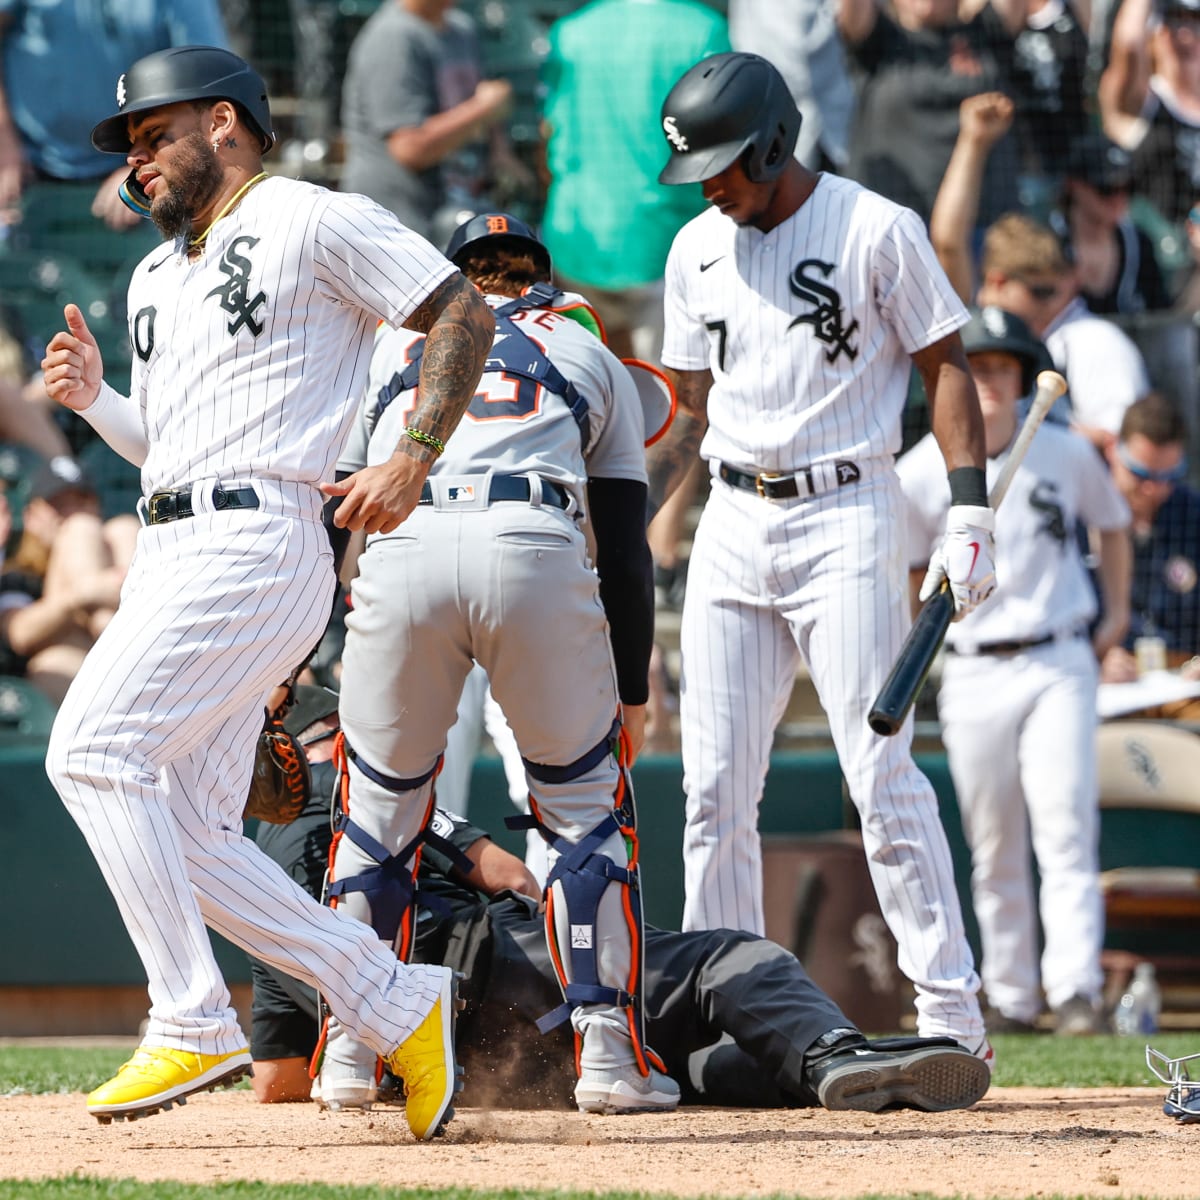 Right on Q: Winning Ugly  forever - South Side Sox